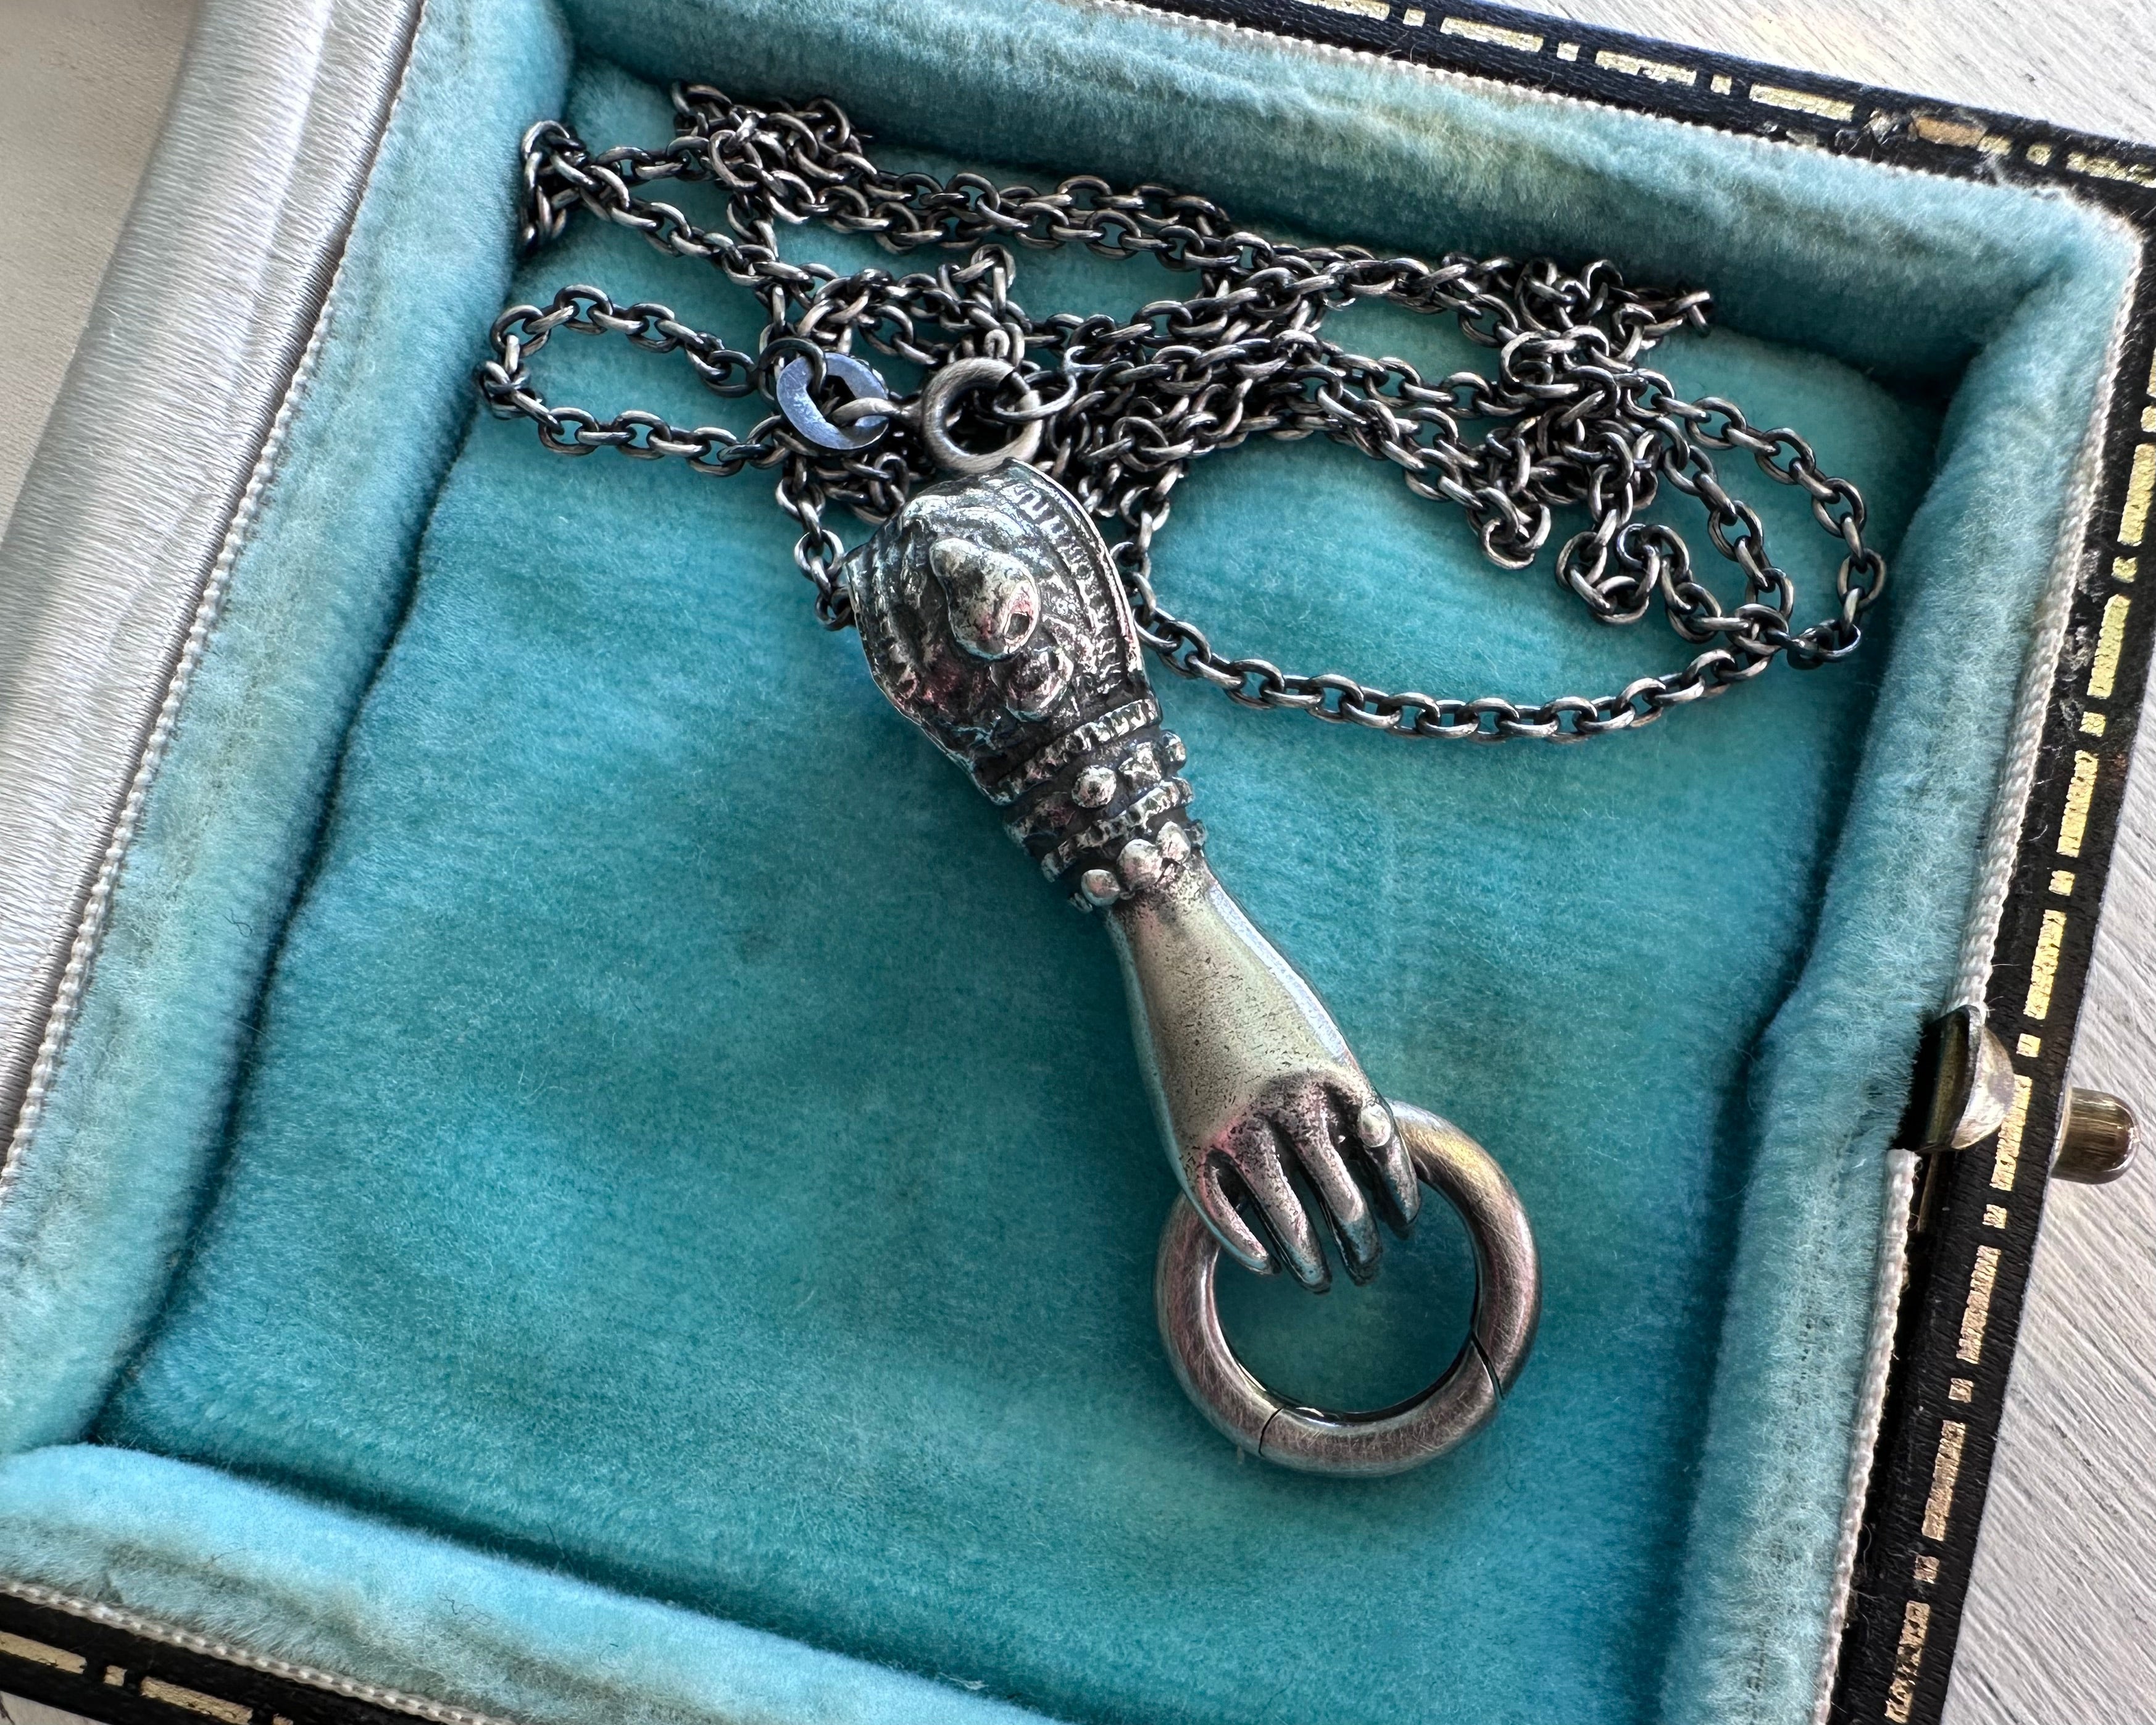 Victorian hand holding charm holder necklace pendant - figural